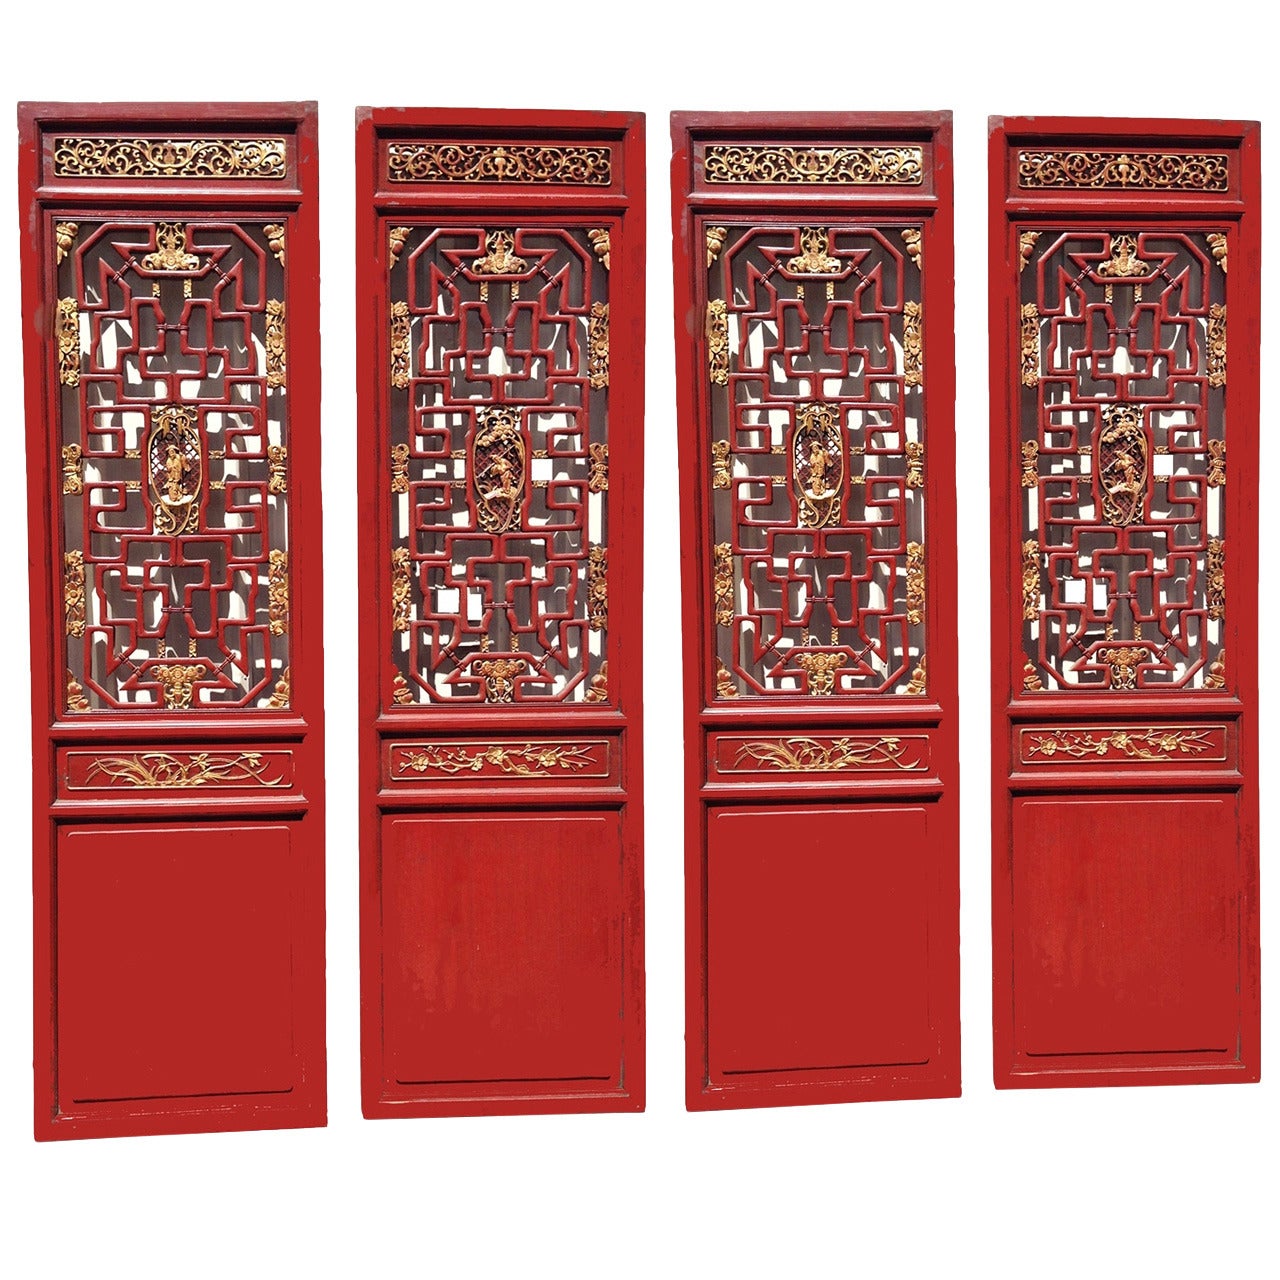 Set of 4 Chinese Antique Carved Doors, Screen, Red and Gilt, 19th Century